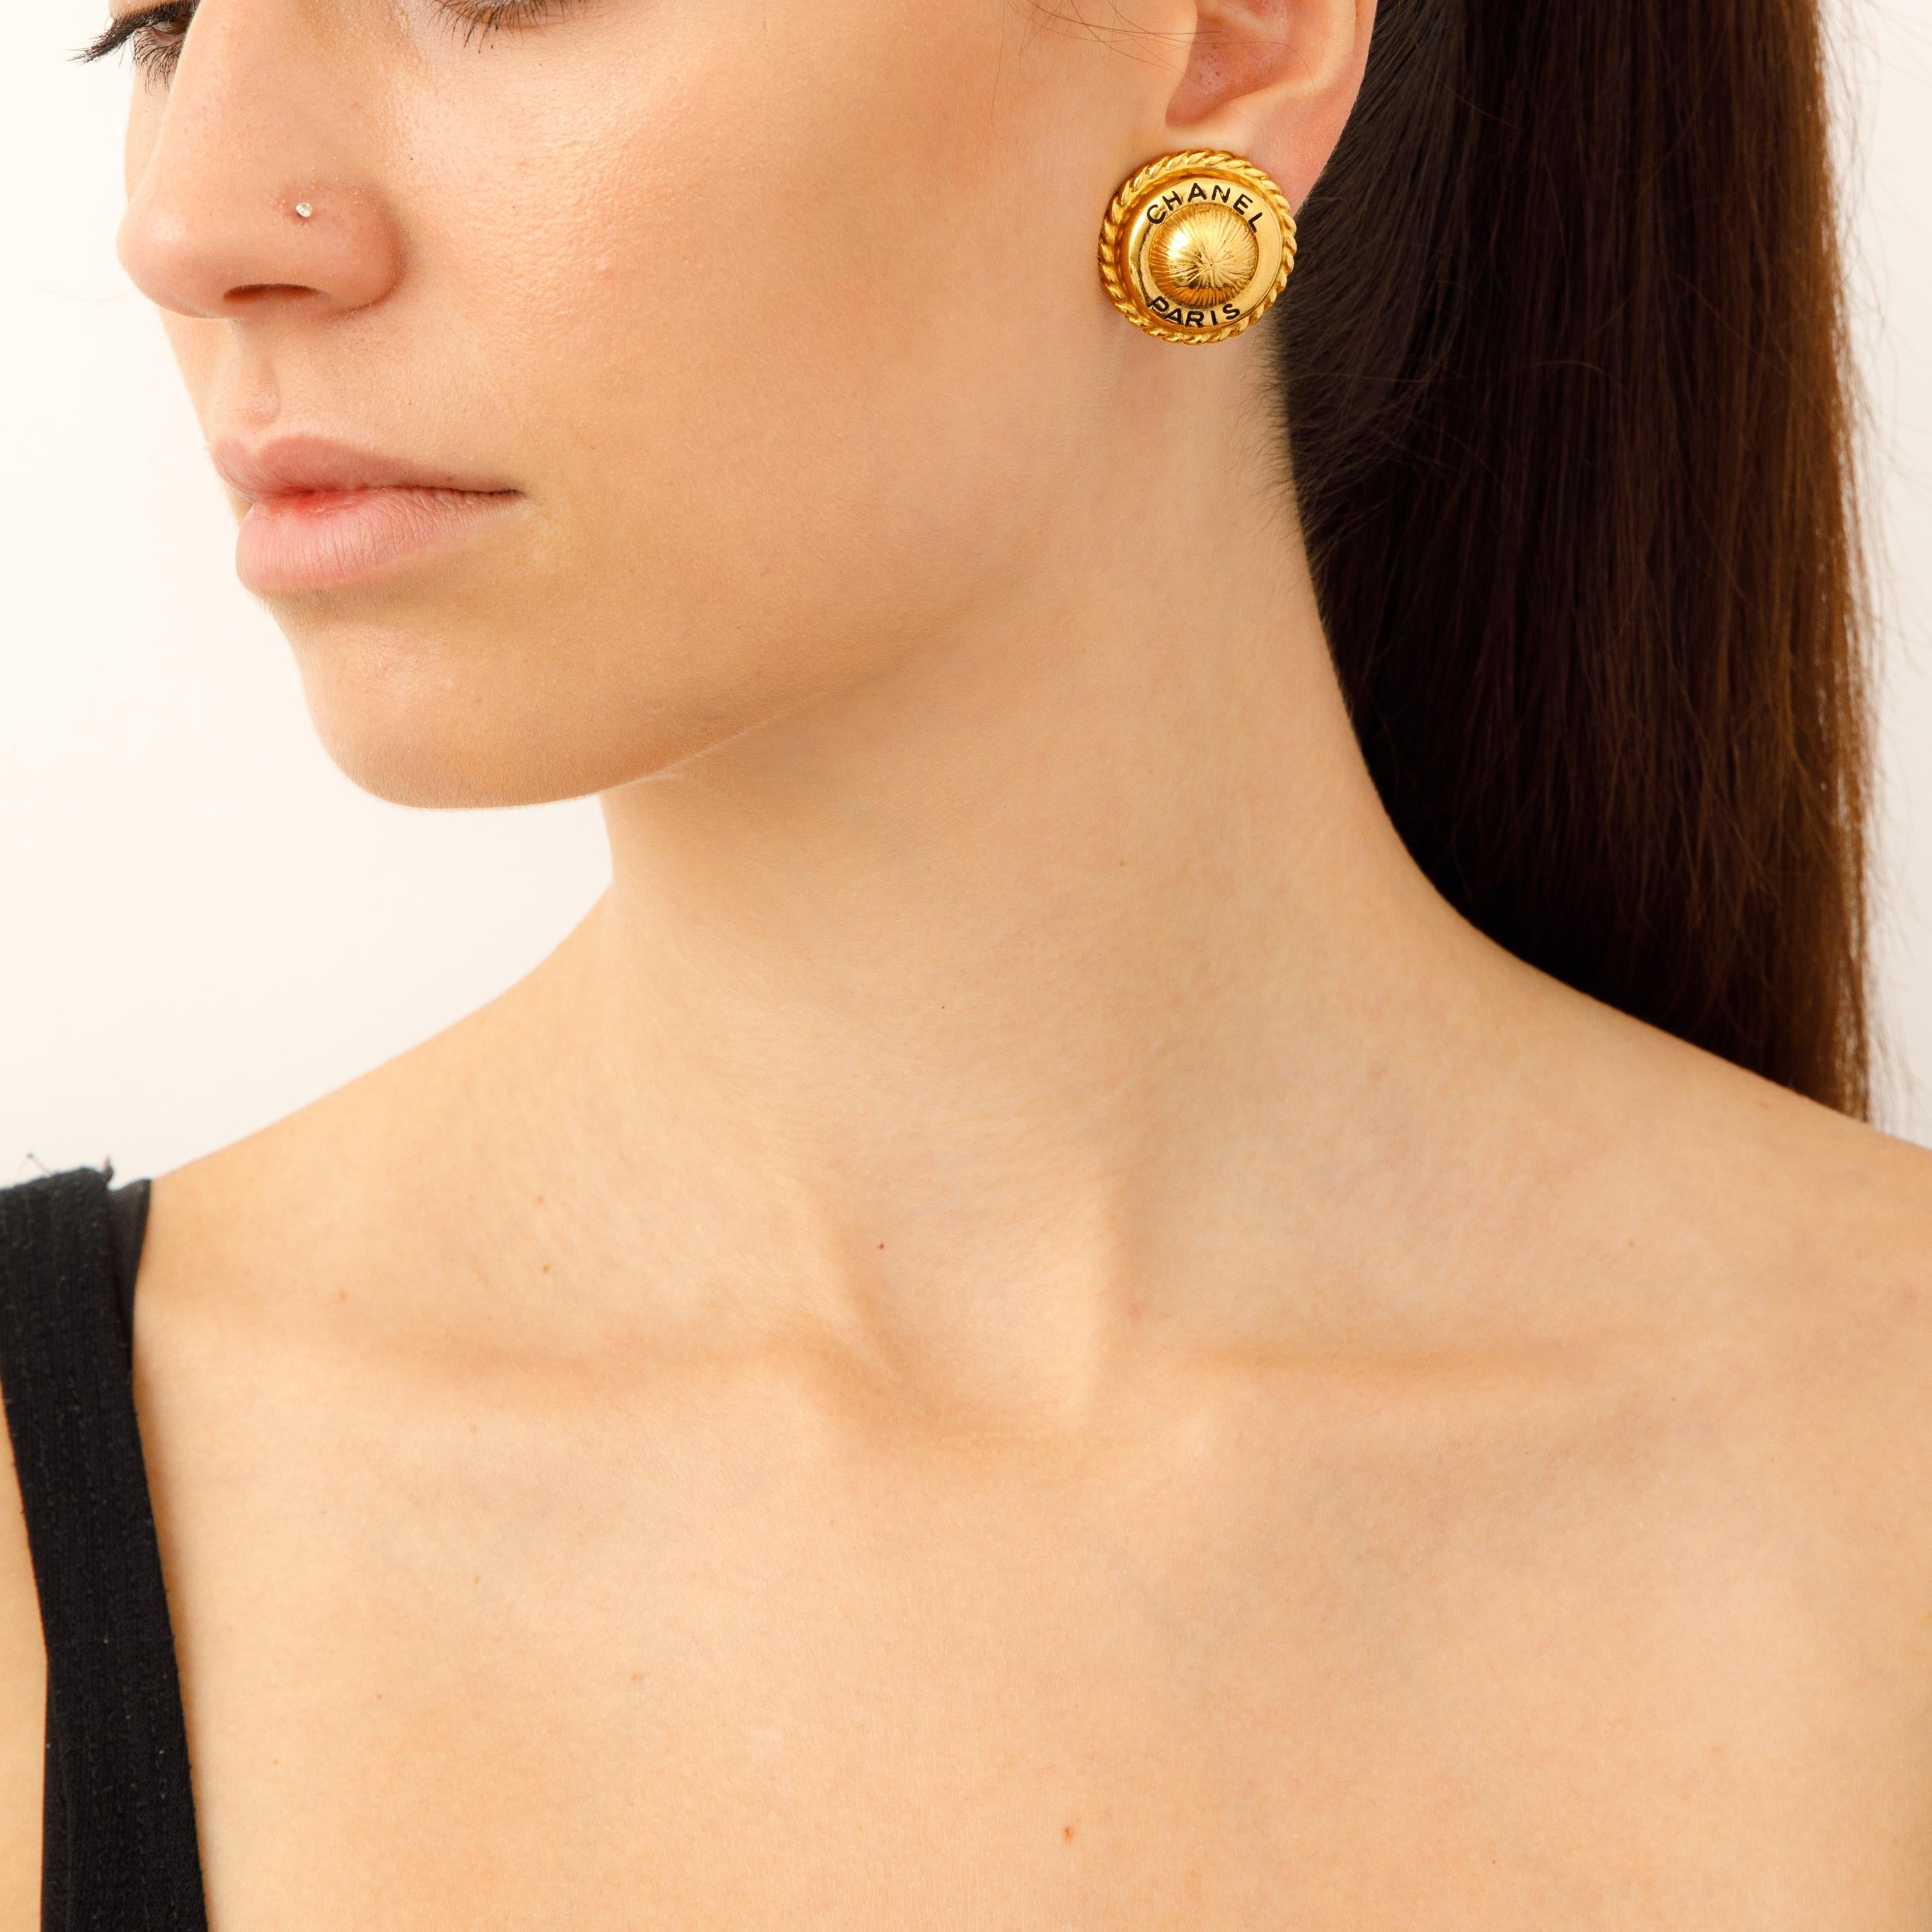 These exquisite Vintage Chanel Paris Button Earrings embody the timeless elegance and exquisite craftsmanship of the iconic French luxury brand. Crafted in luxurious gold-tone metal and featuring the classic signed Chanel logo, these earrings will